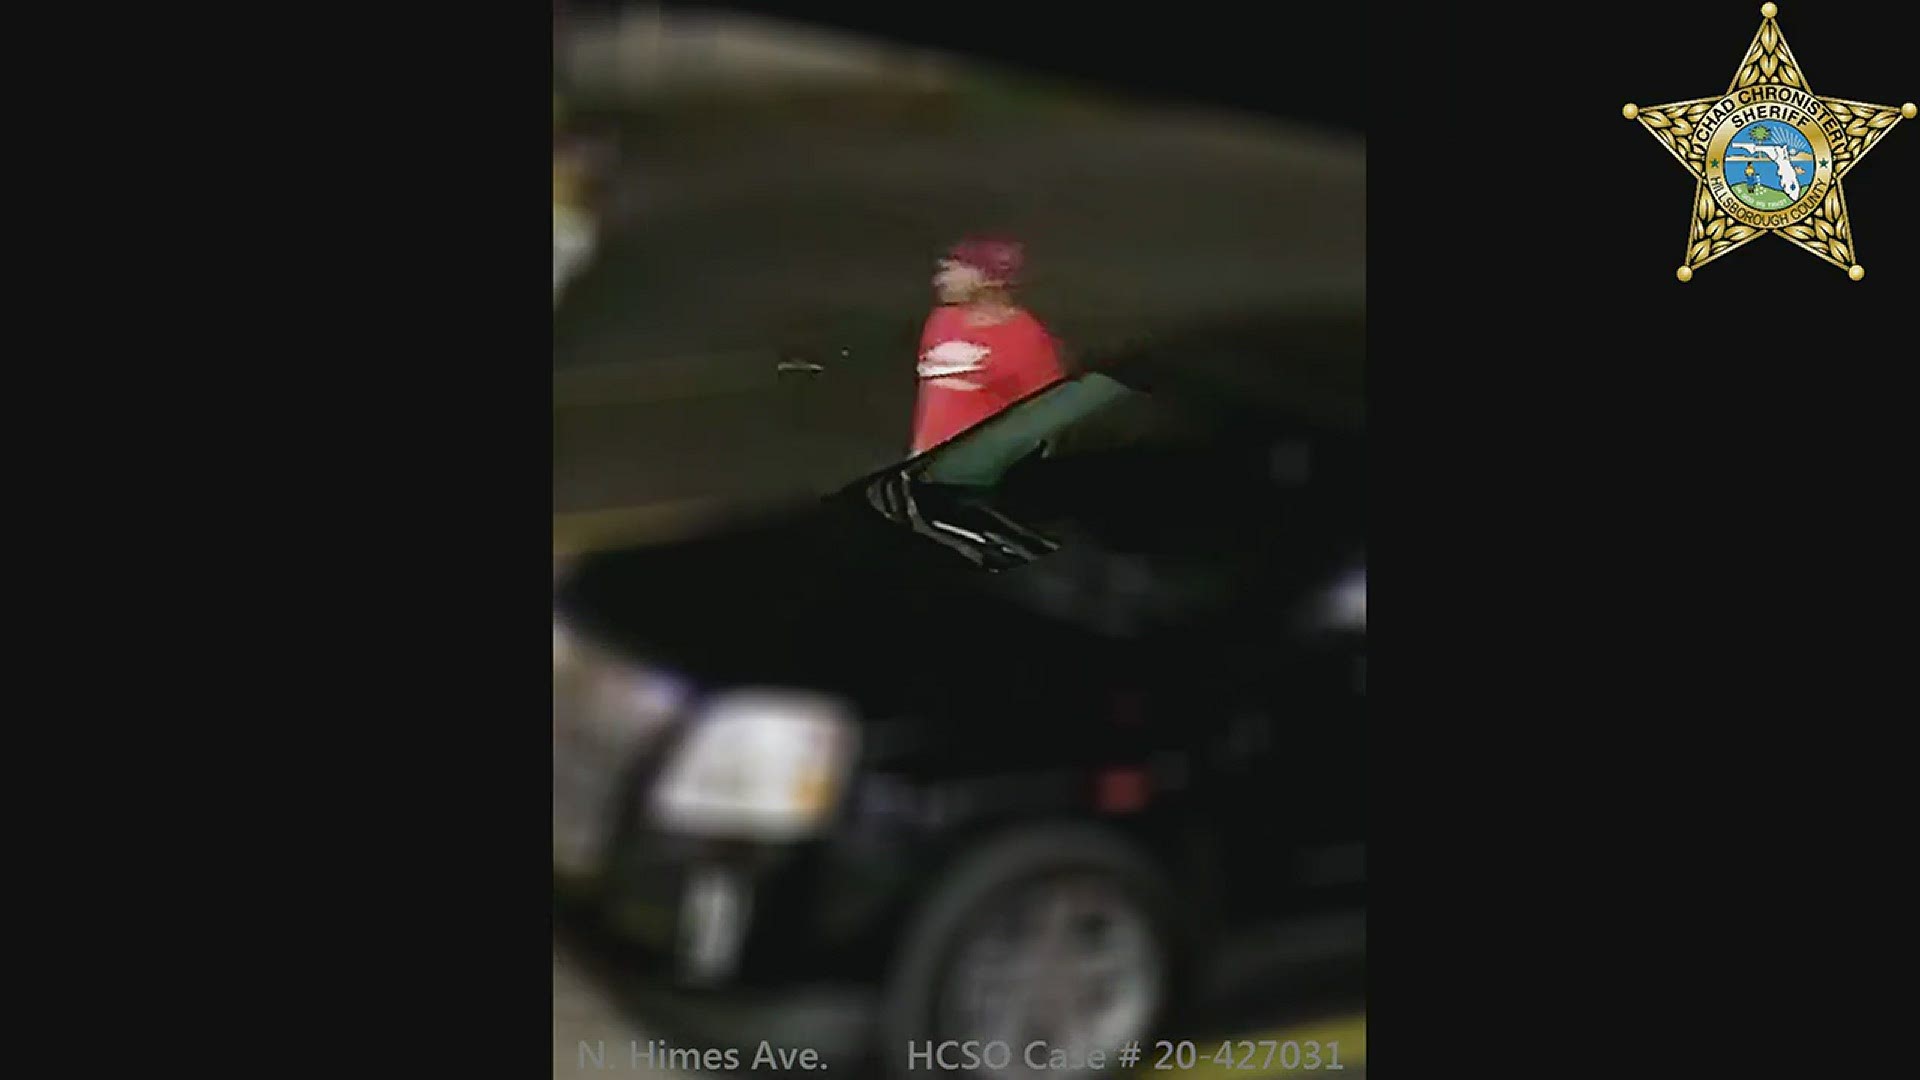 The Hillsborough County Sheriff's Office is searching for a man who surveillance video showed firing six rounds from a handgun on N Himes Avenue in Tampa on June 29.